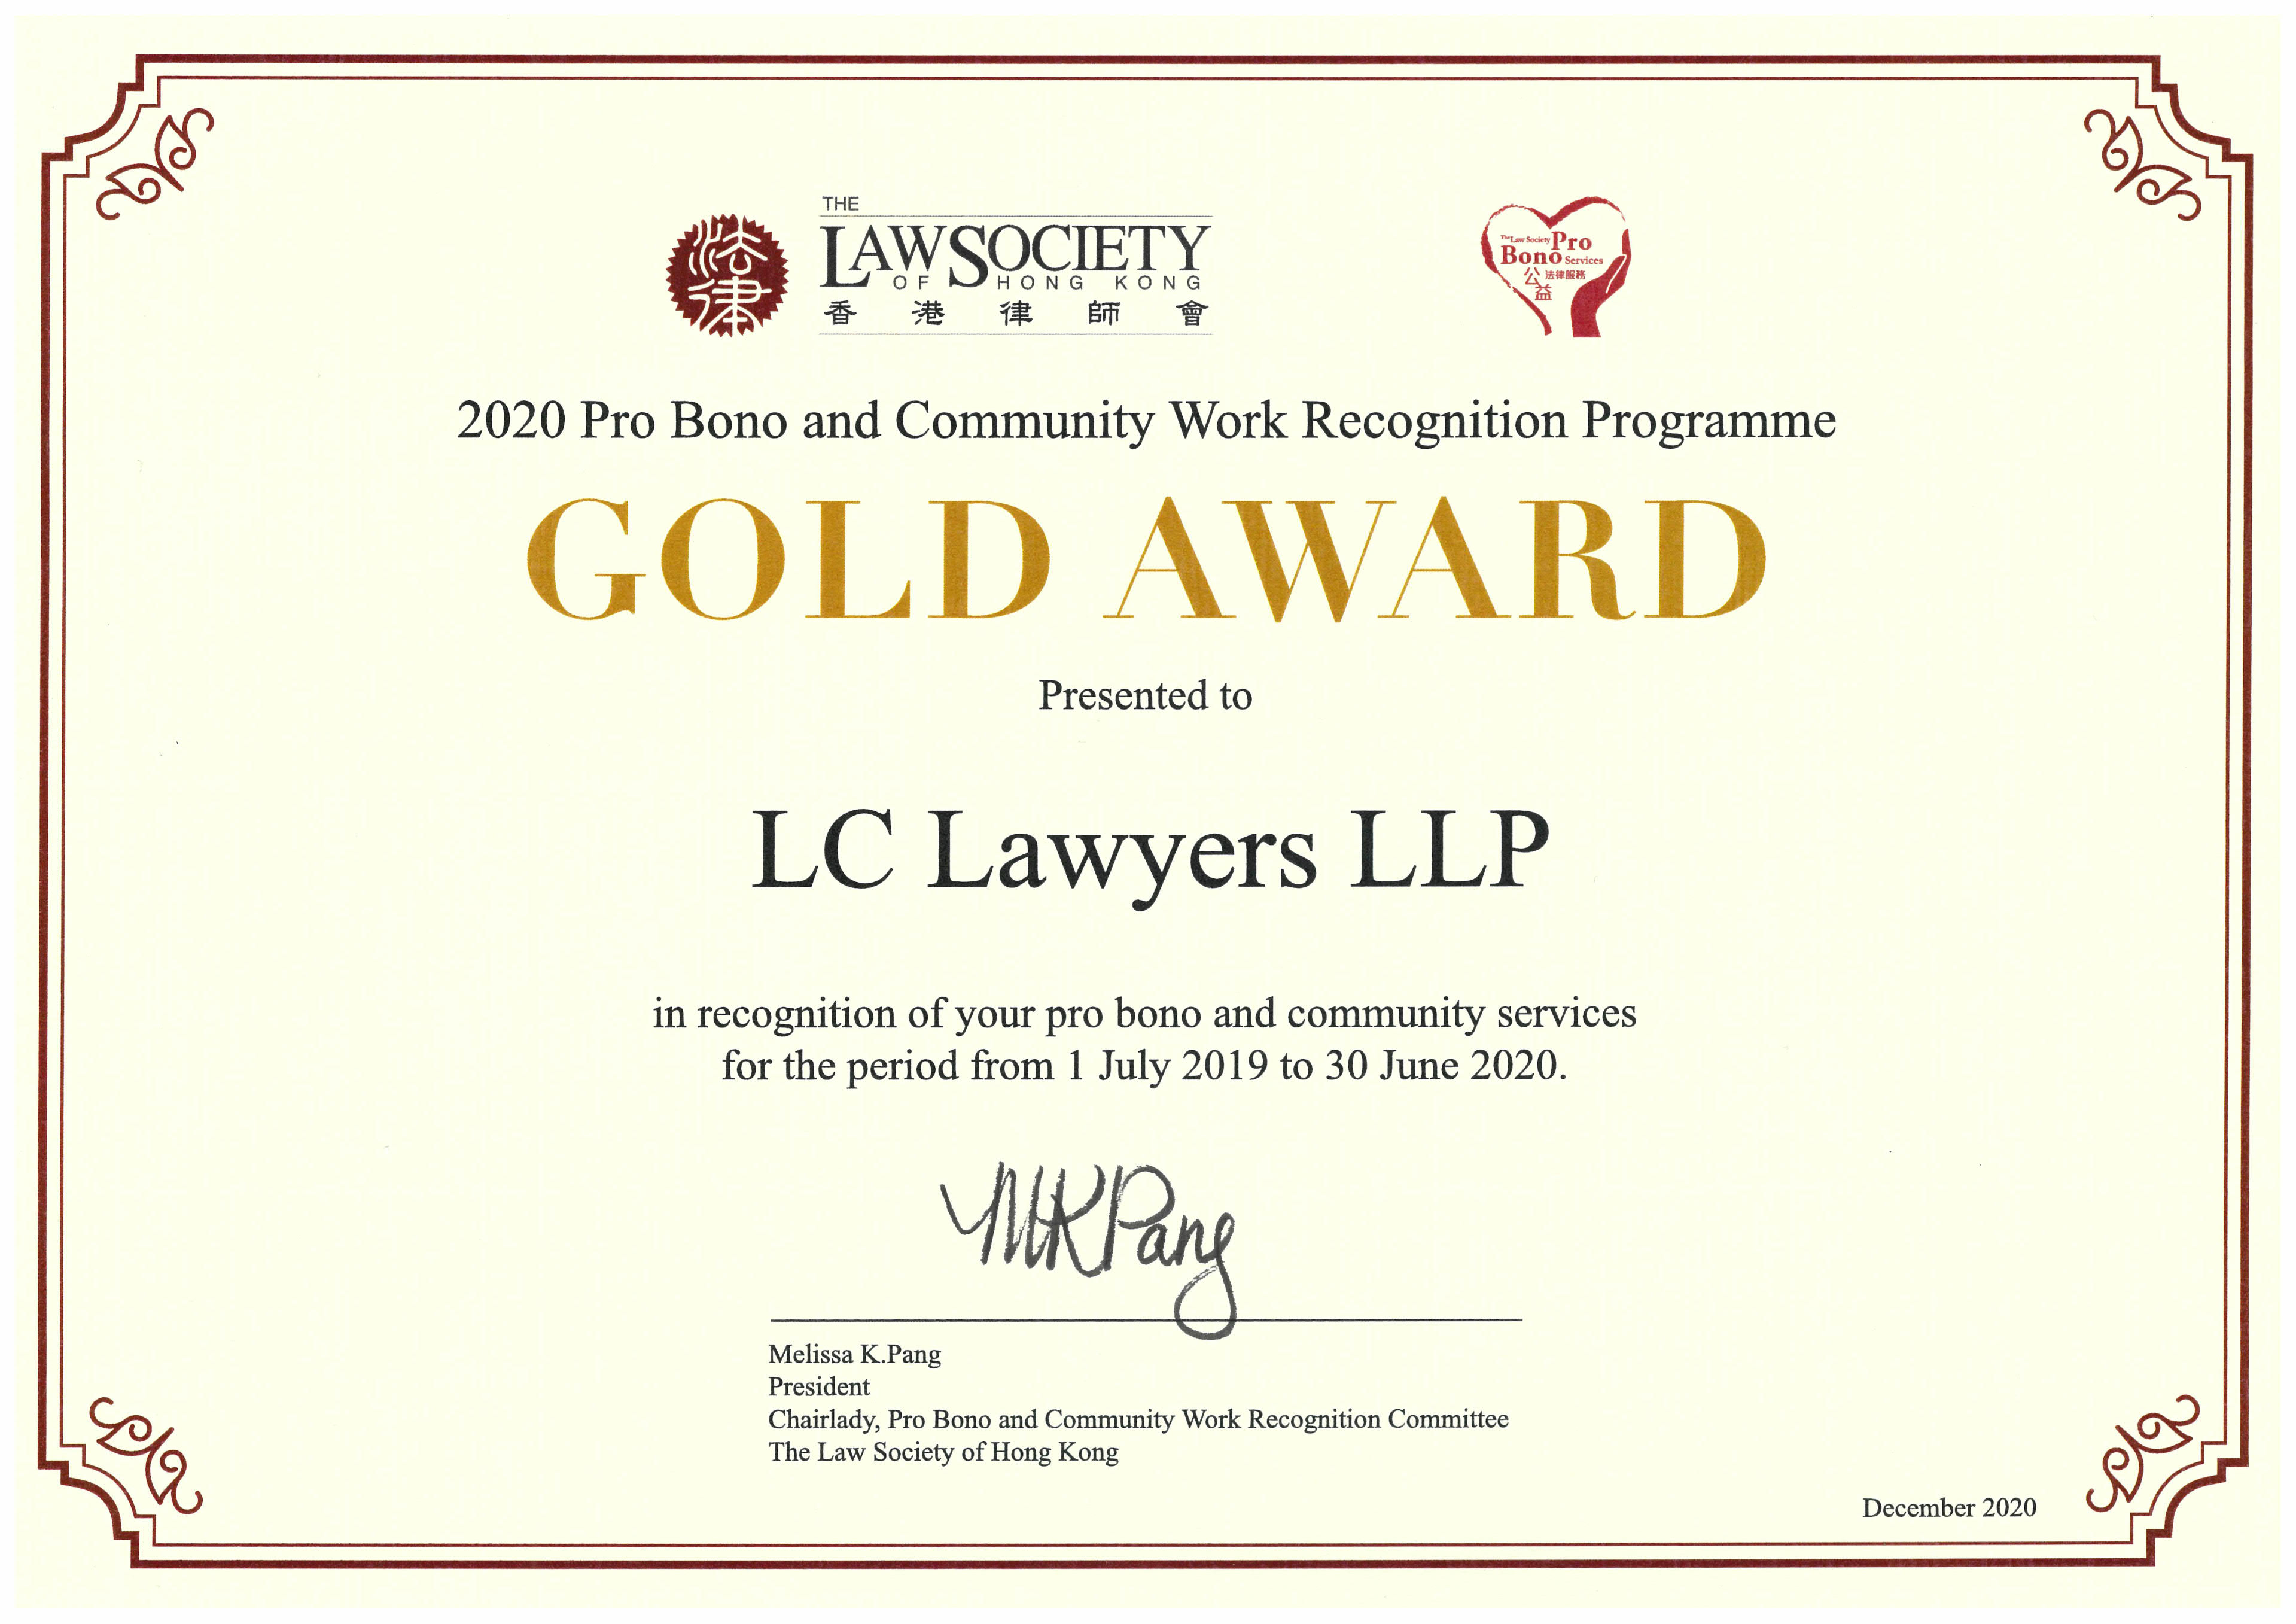 Gold Law Firm Award in Pro Bono Service by The Law Society of Hong Kong, 2020